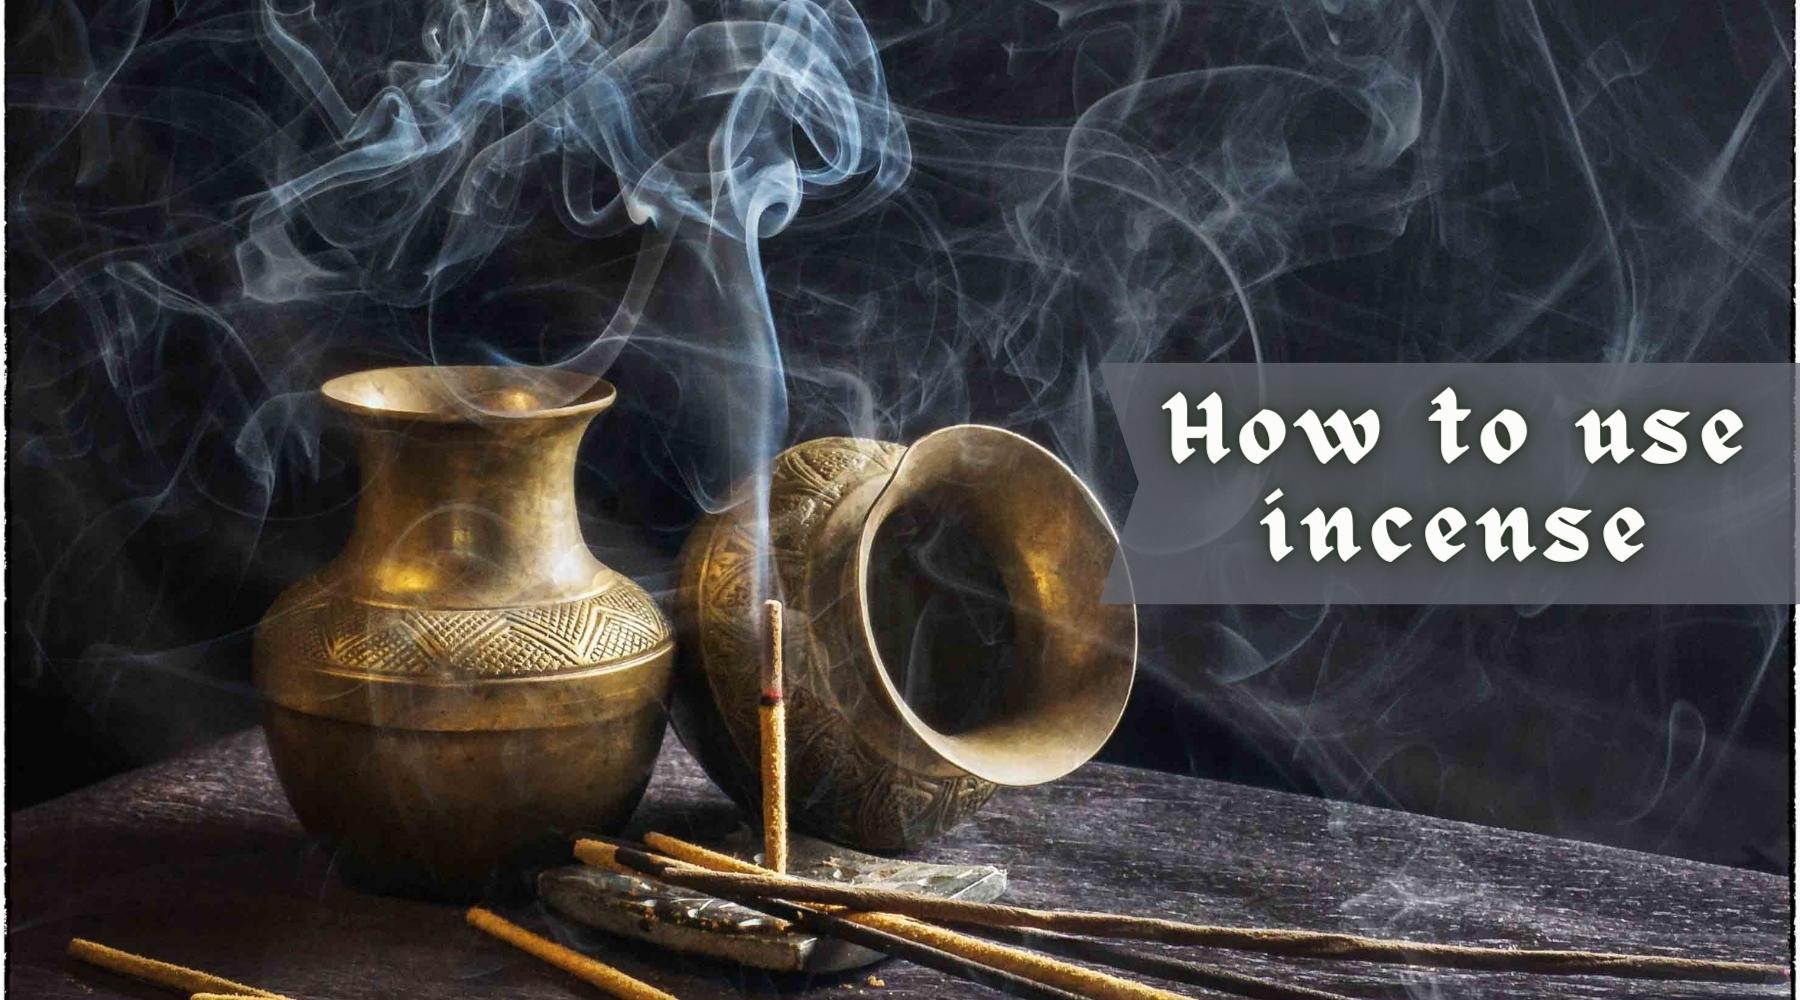 How to use incense and the types of incense you can use